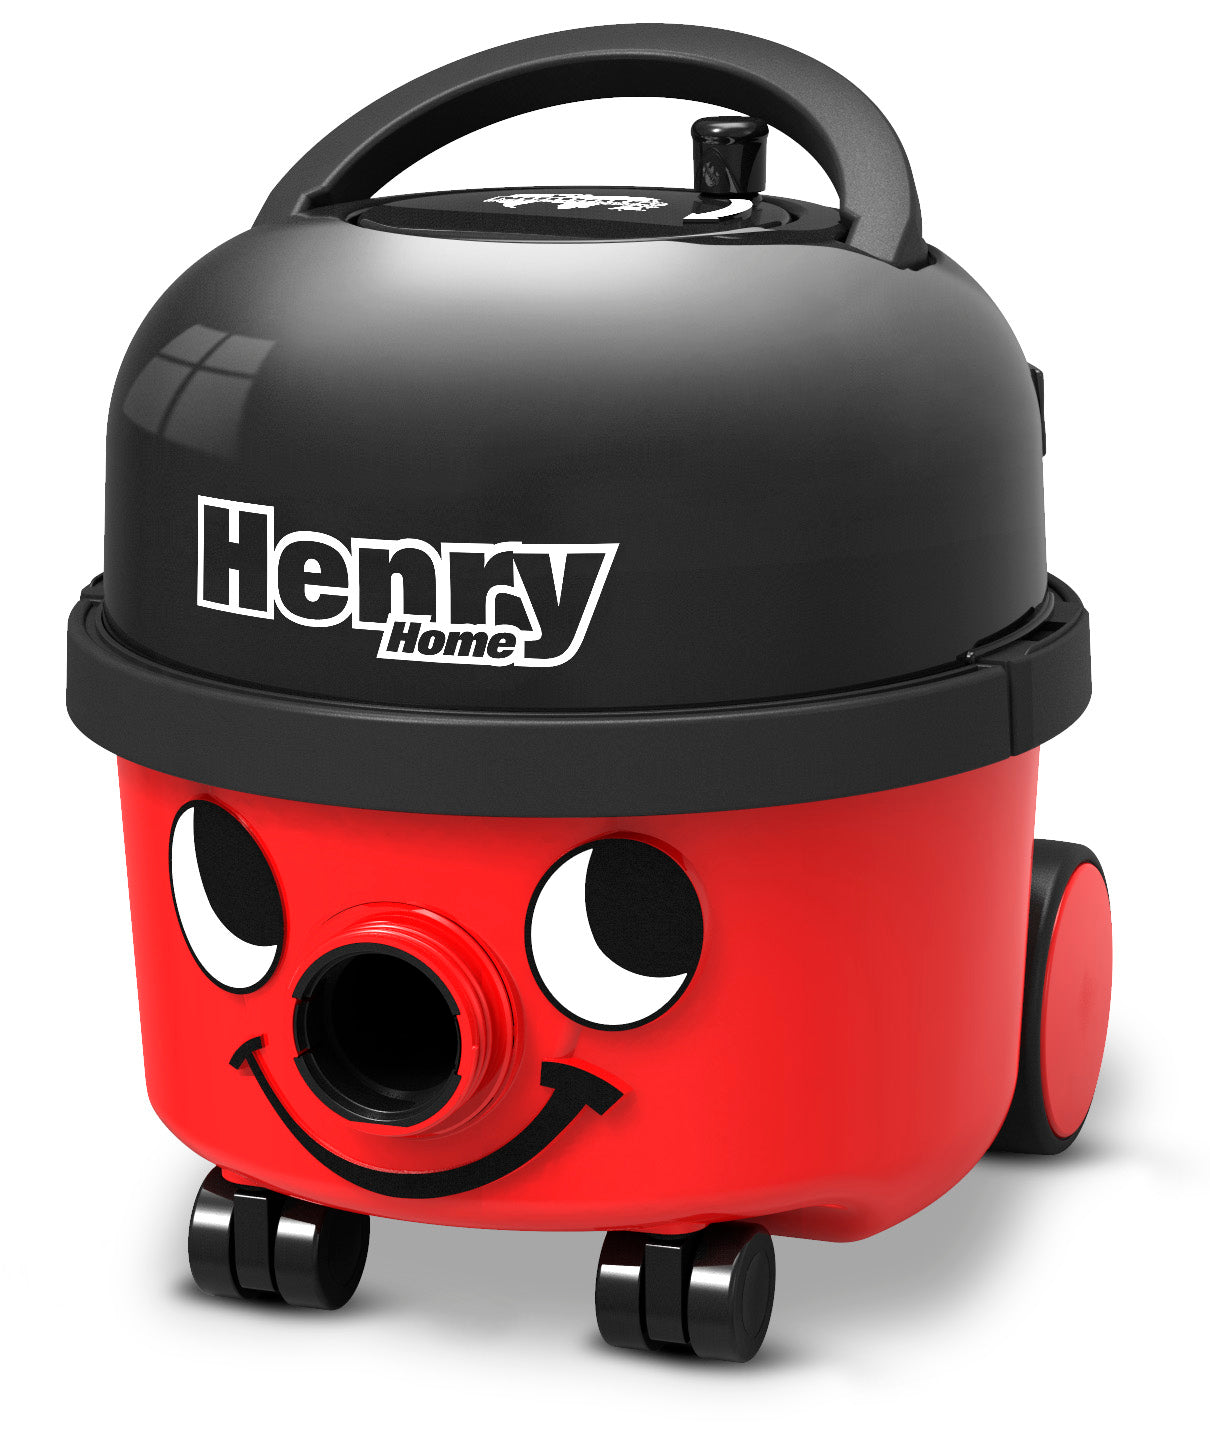 Henry Home